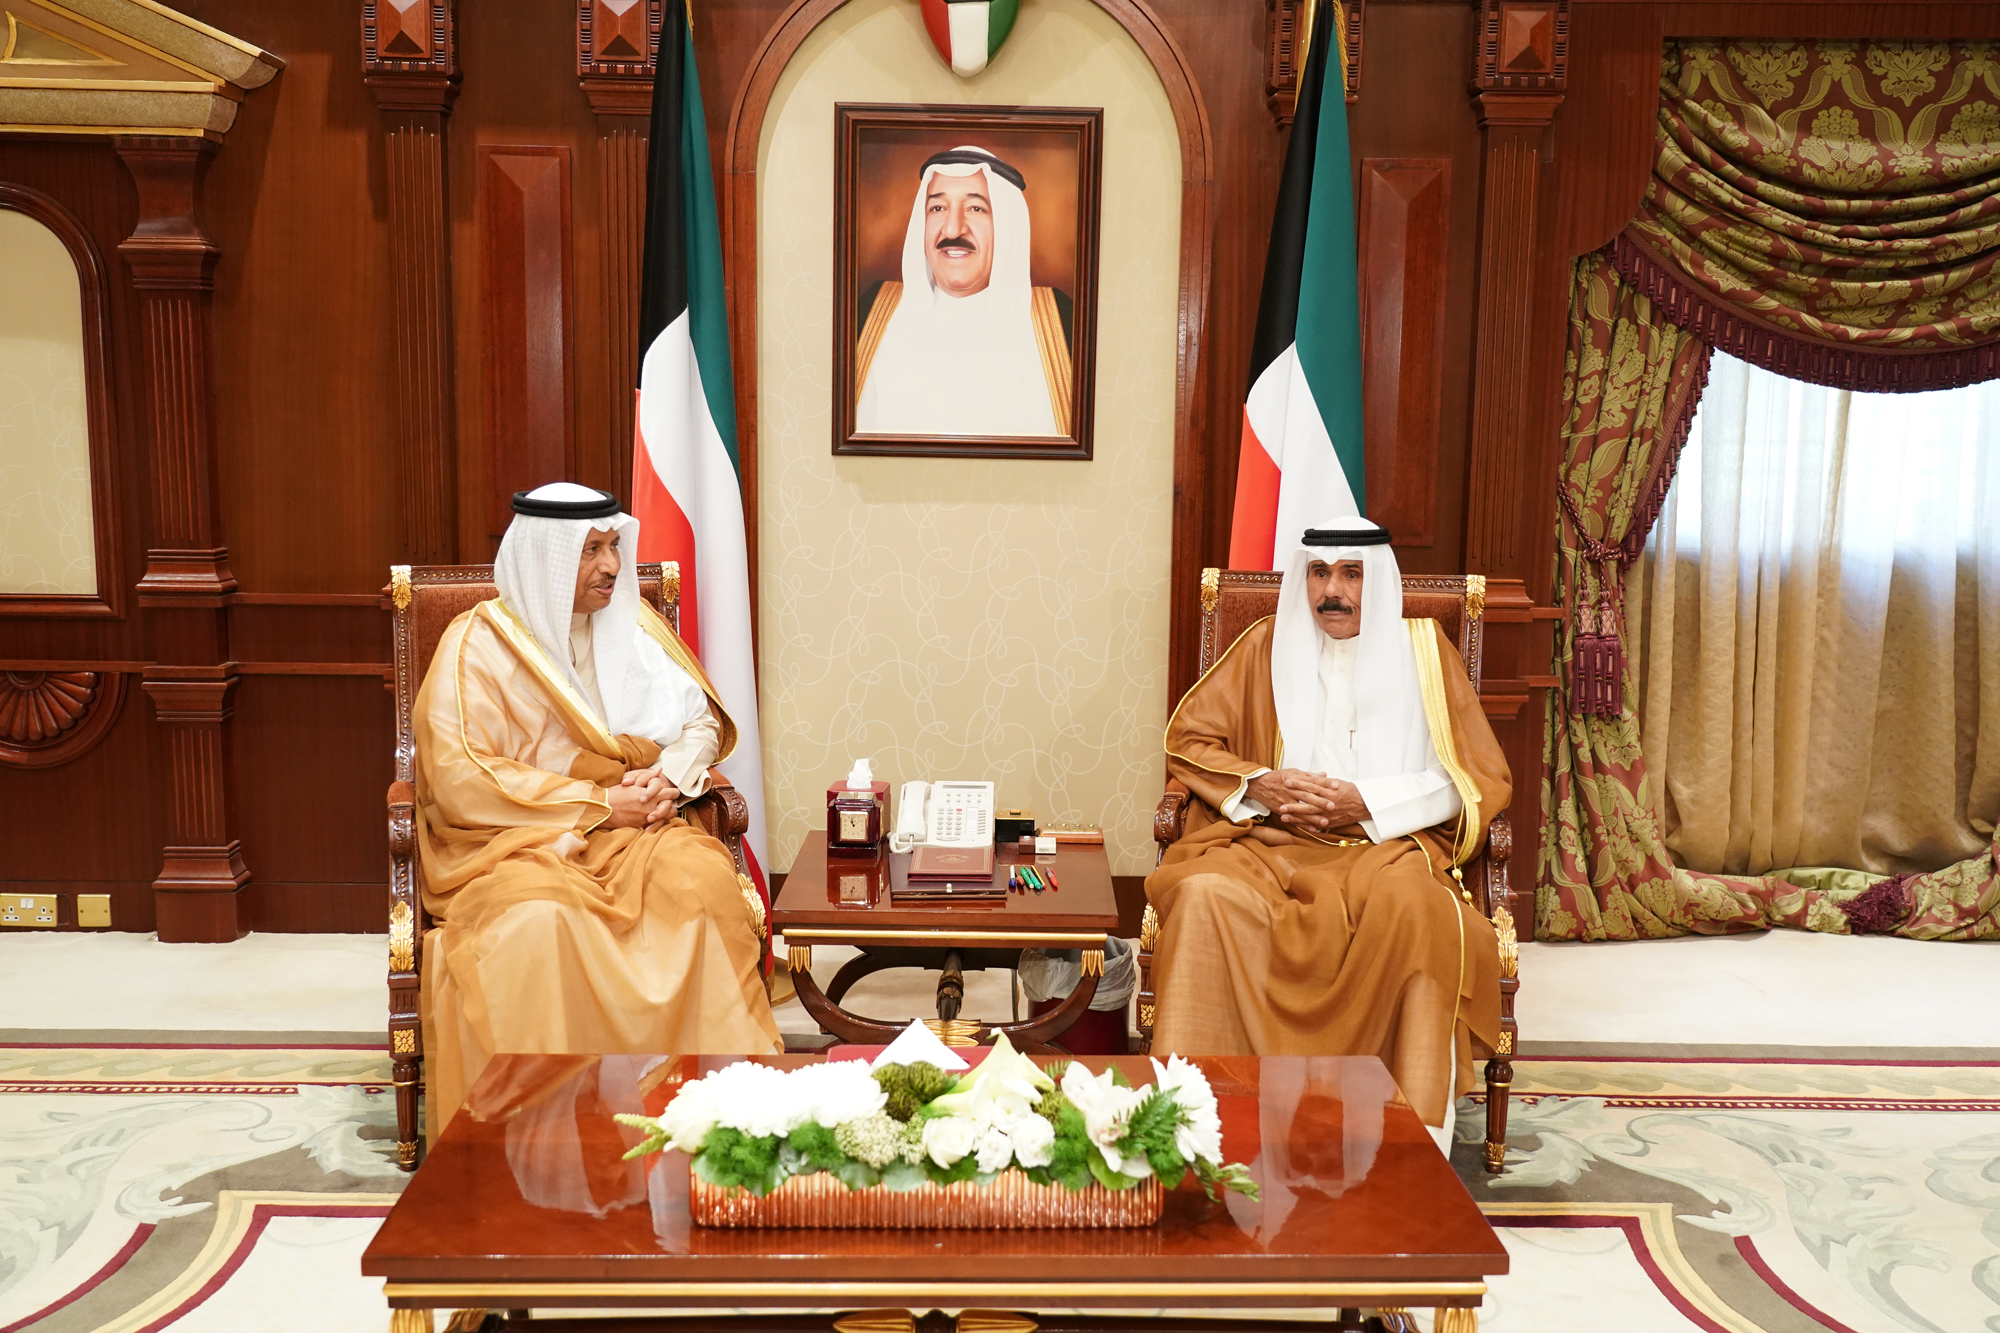 H.H the Crown Prince received H.H the PM